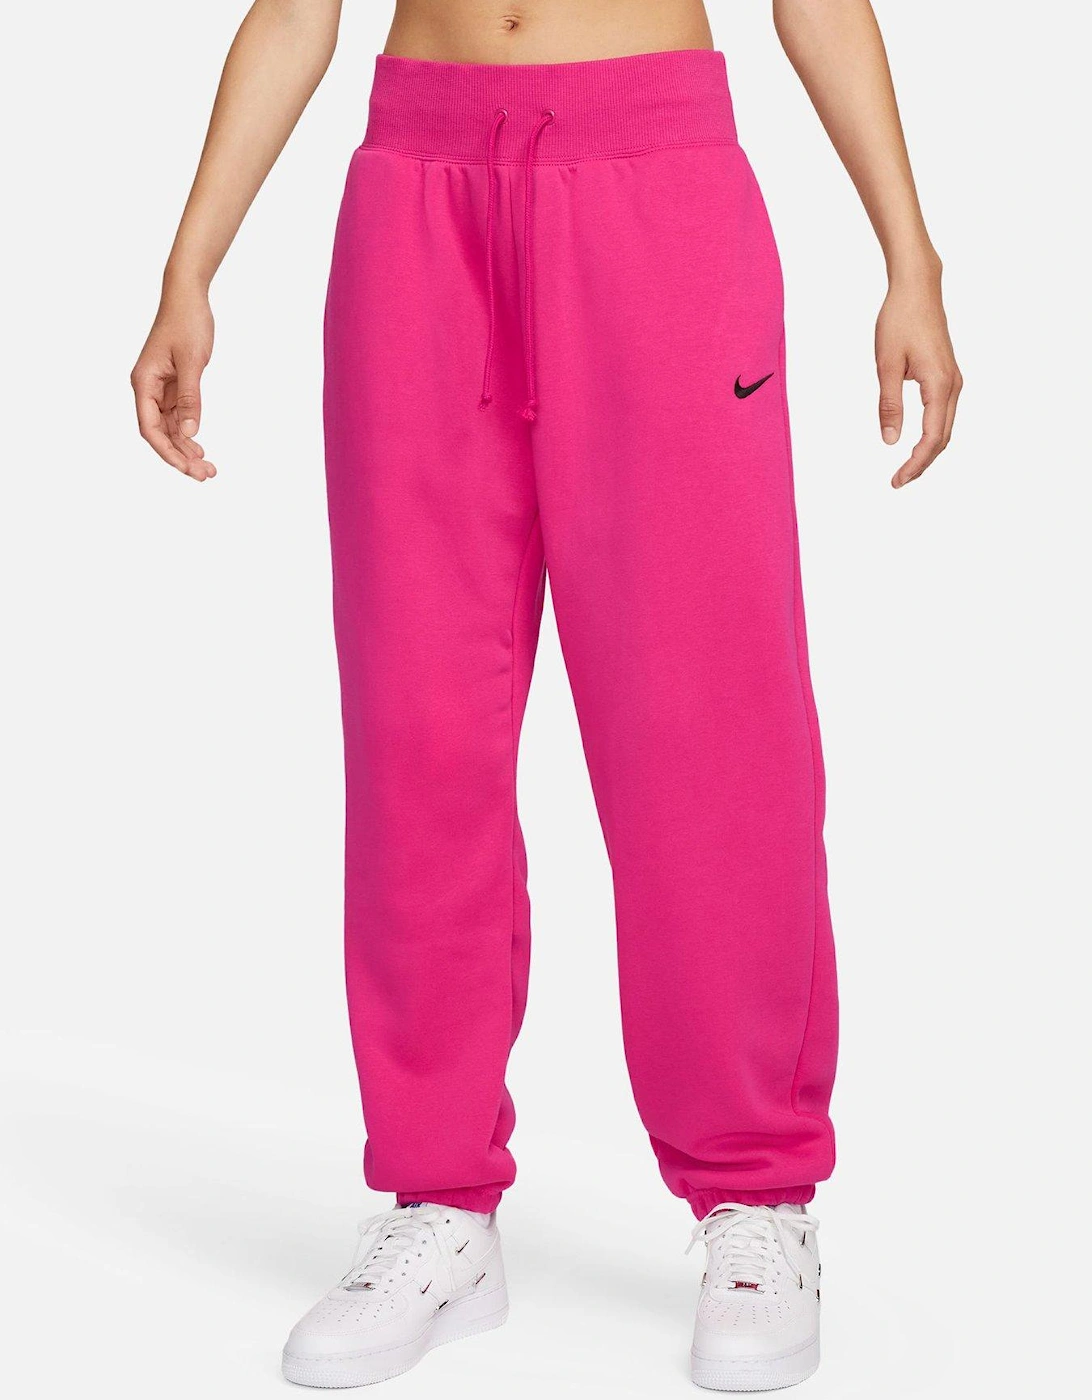 Women's High-waisted Oversized Sweatpants - Pink, 7 of 6